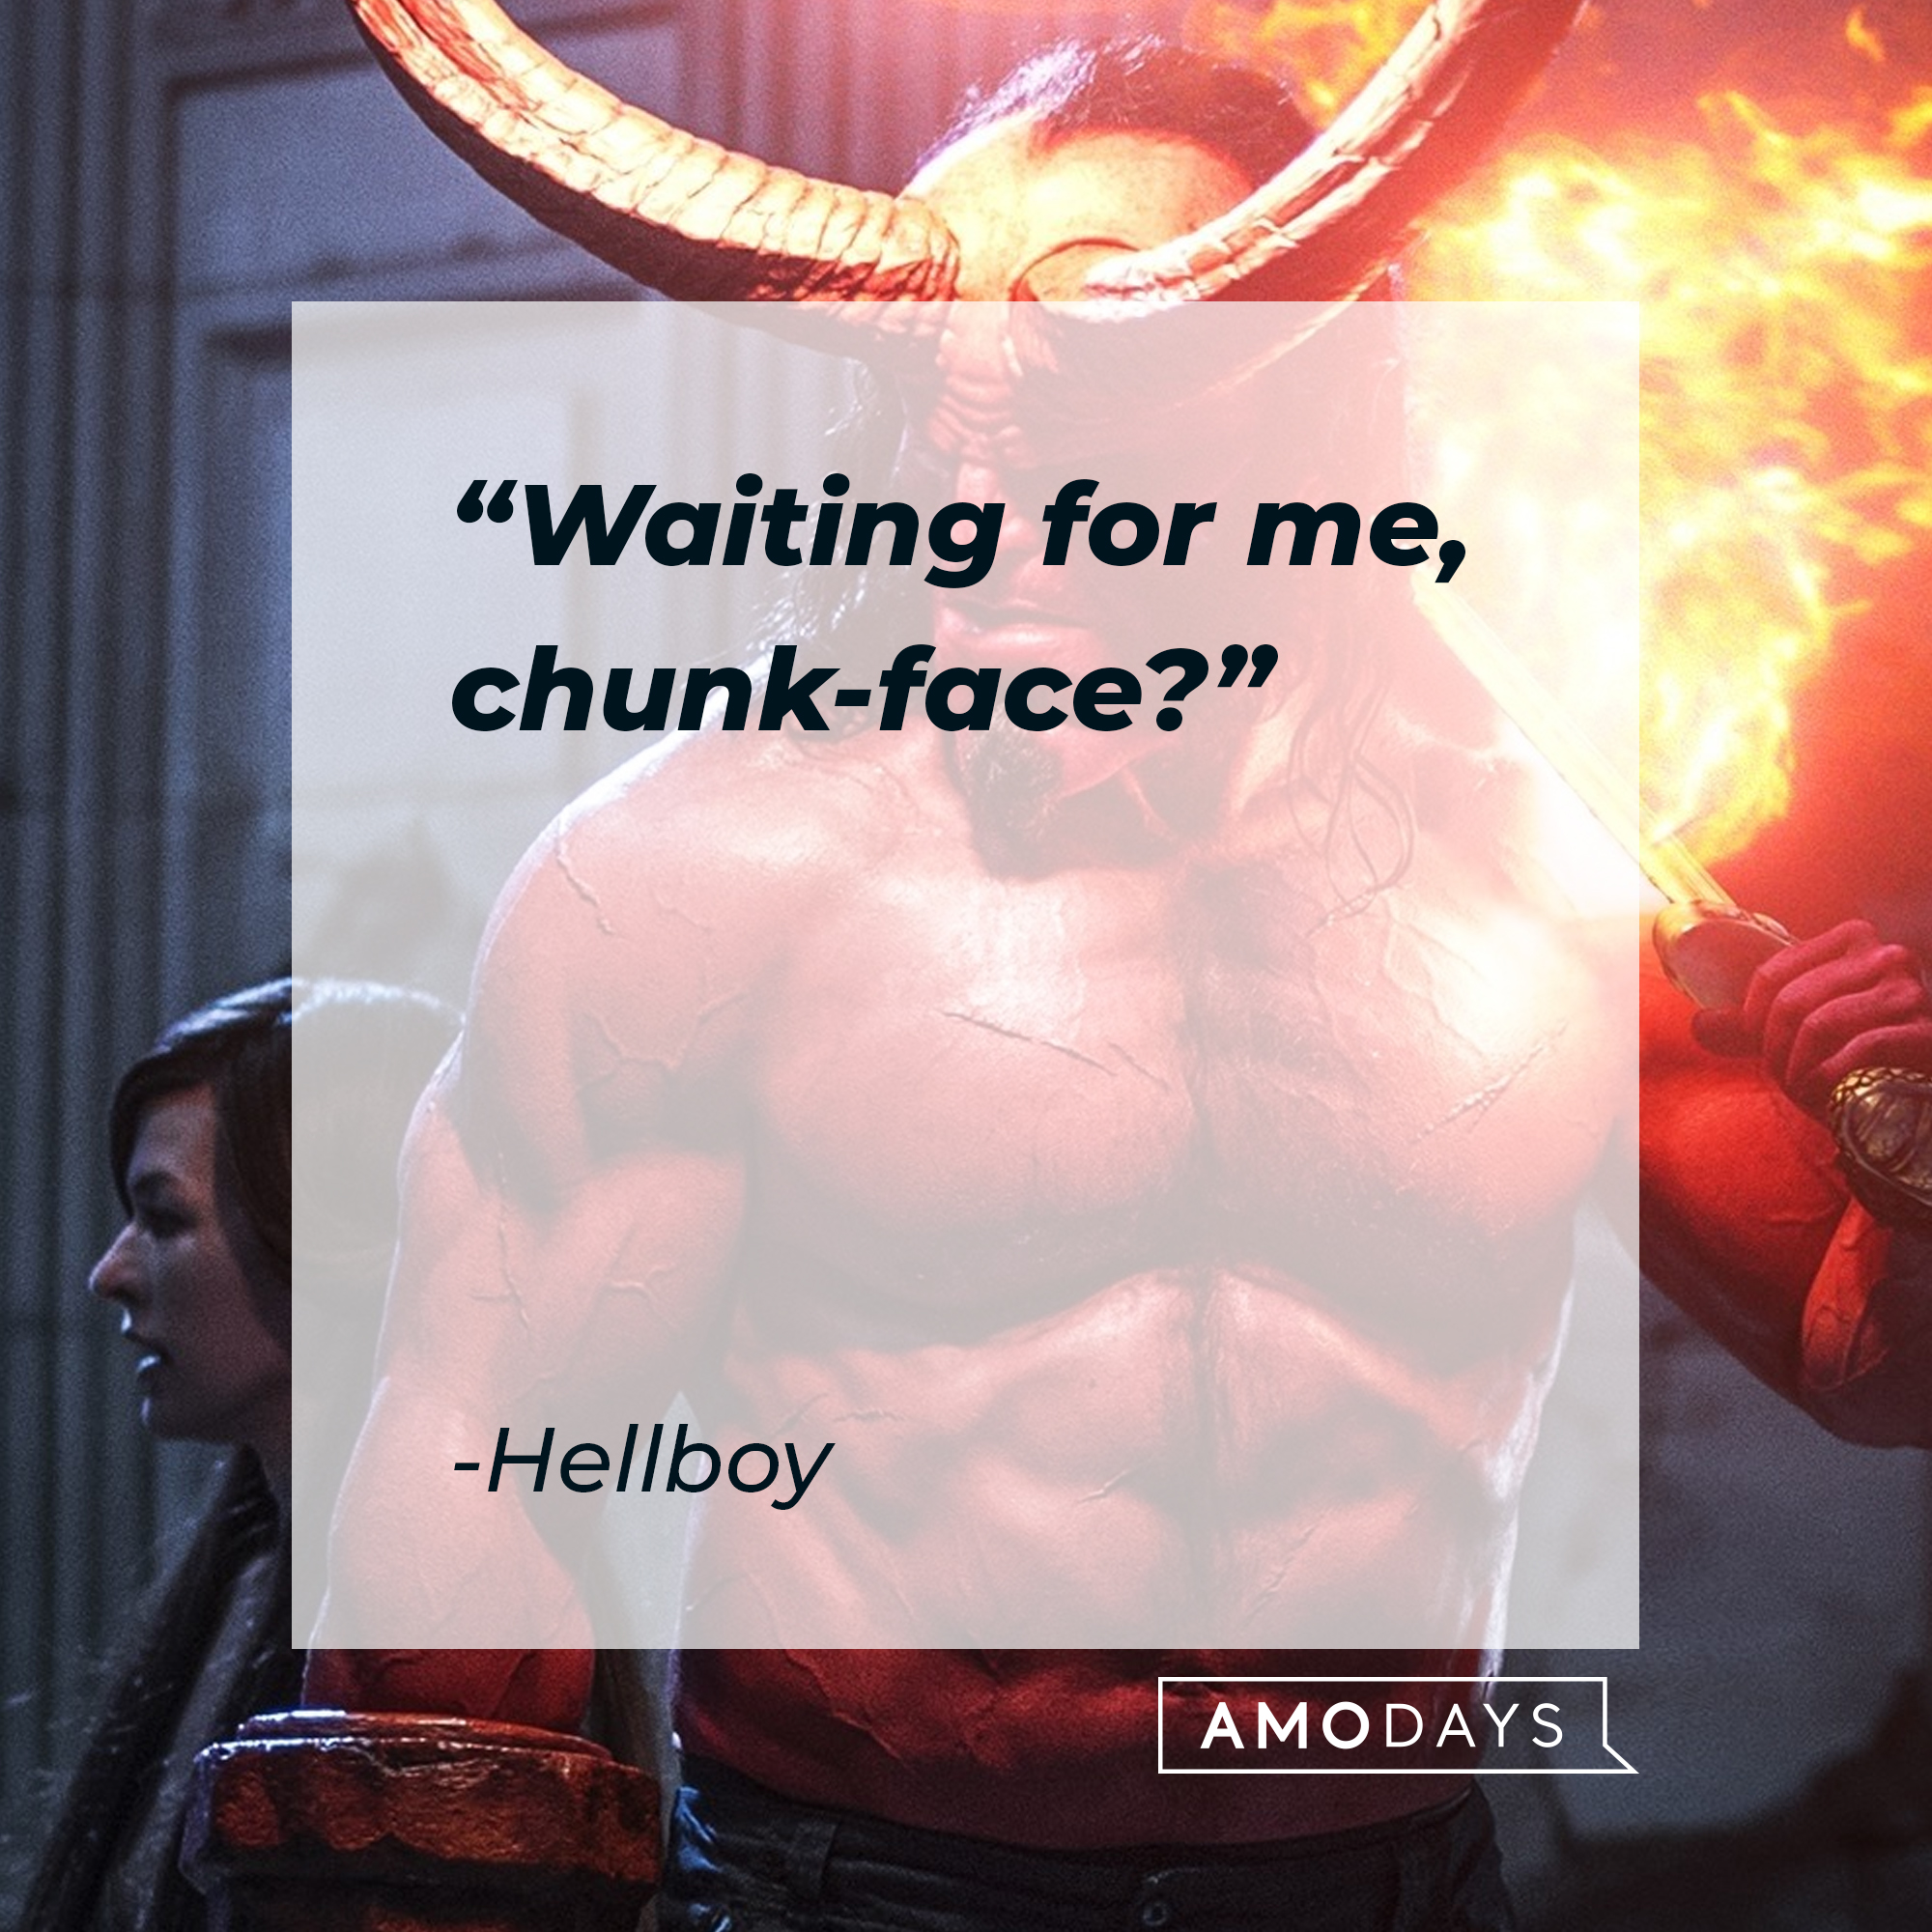 Hellboy's quote: "Waiting for me, chunk-face?" | Source: facebook.com/hellboymovie